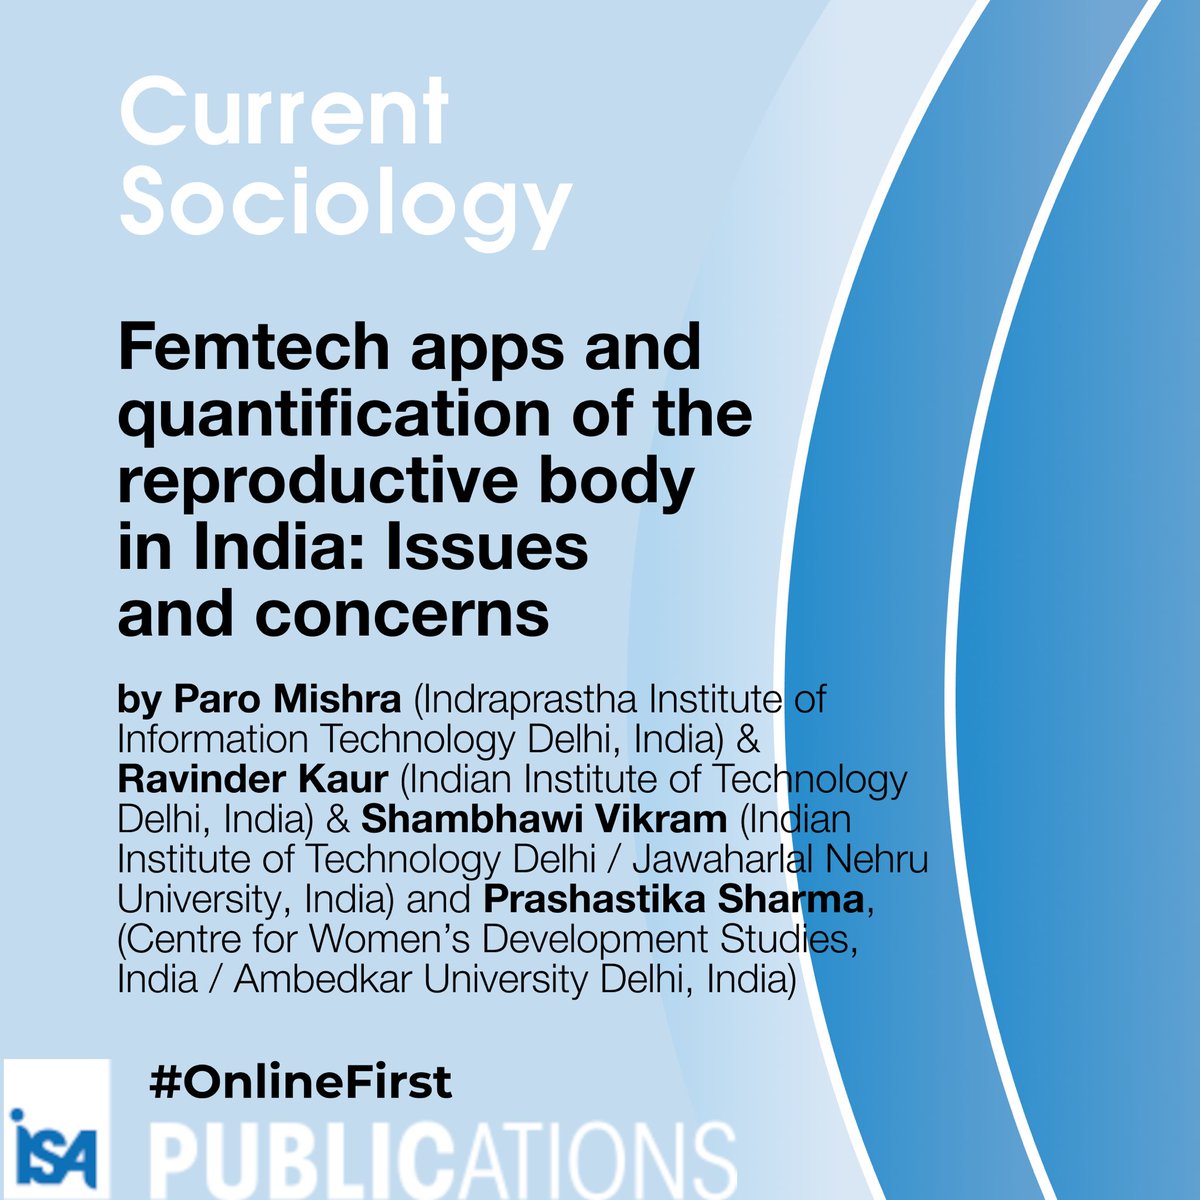 🤳 This #OnlineFirst article examines datafication of the reproductive body in India through use of femtech 📲🇮🇳 mobile phone apps. 🌐 journals.sagepub.com/doi/abs/10.117…